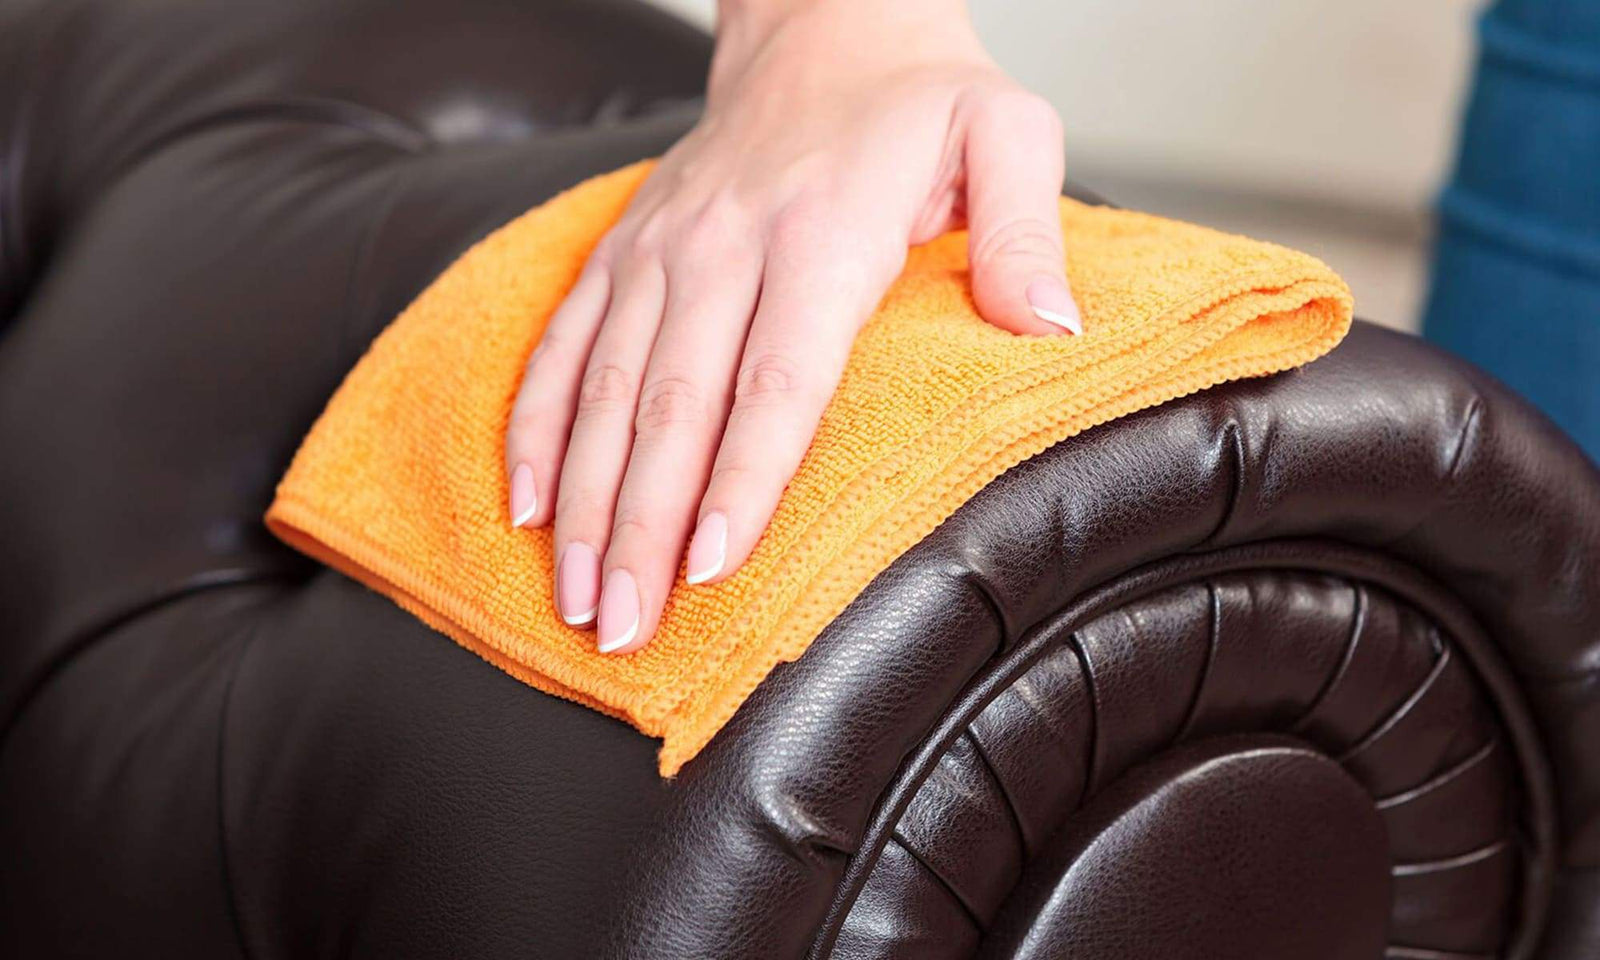 How to Clean a Leather Sofa: Leather Couch Care & Maintenance